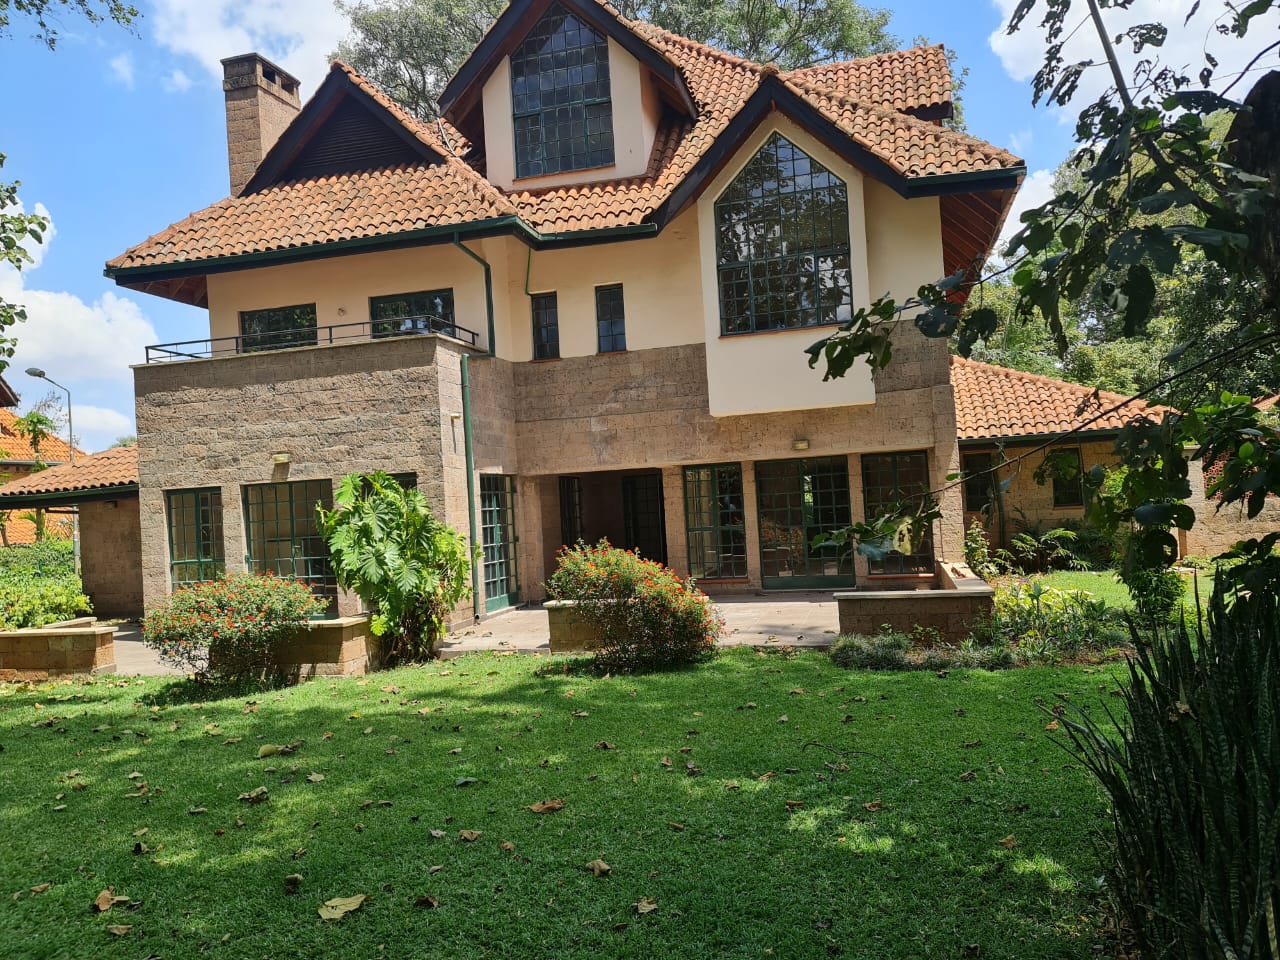 5 Bedrooms House in a gated community of 12 units in Lower kabete for rent at Ksh400k negotiable (19)